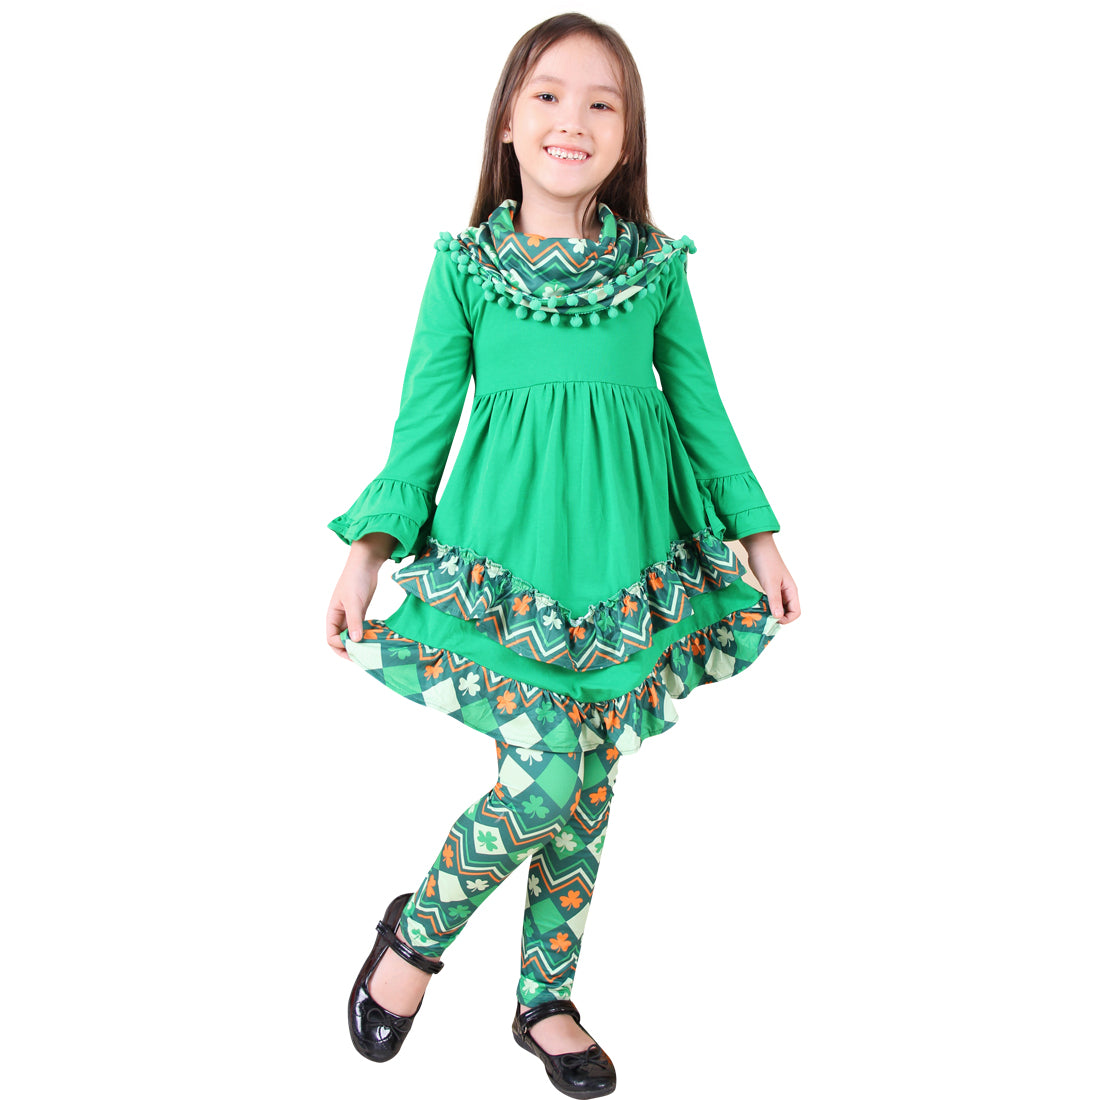 Baby Toddler Little Girl St Patricks Day Shamrock Clover Scarf Outfit - ZigZag/Green - Angeline Kids